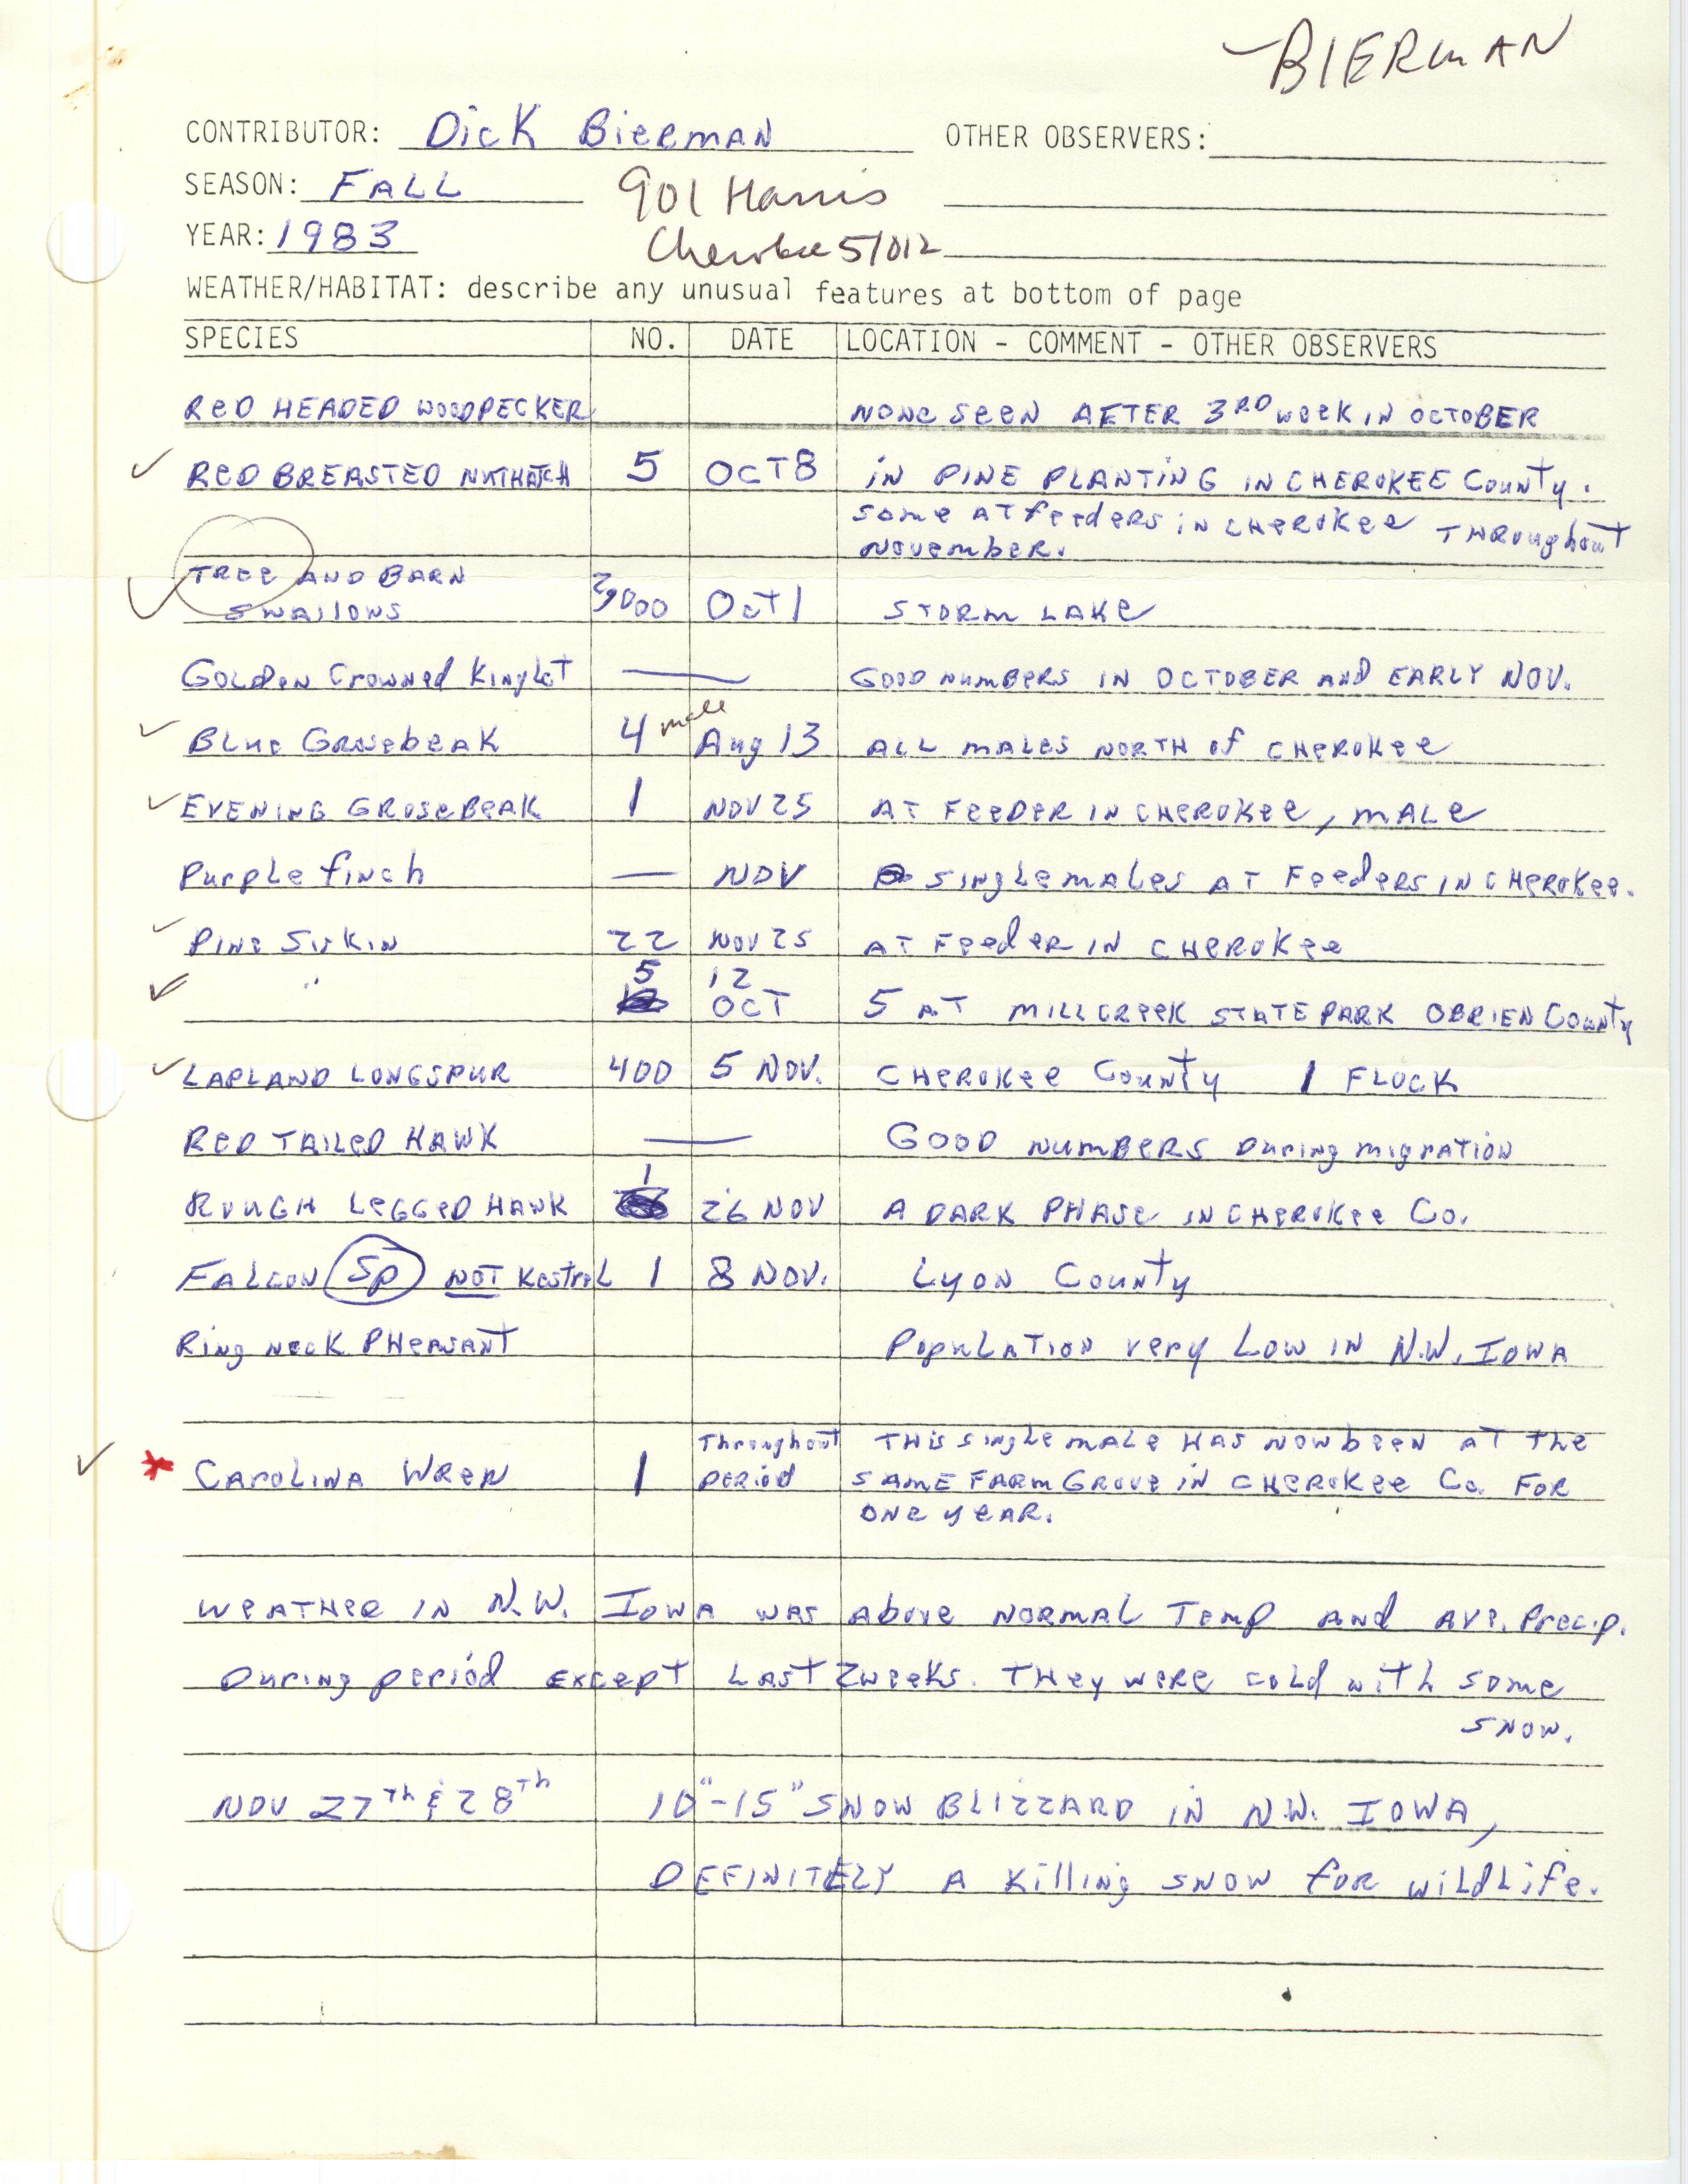 Annotated bird sighting list for fall 1983 compiled by Dick Bierman